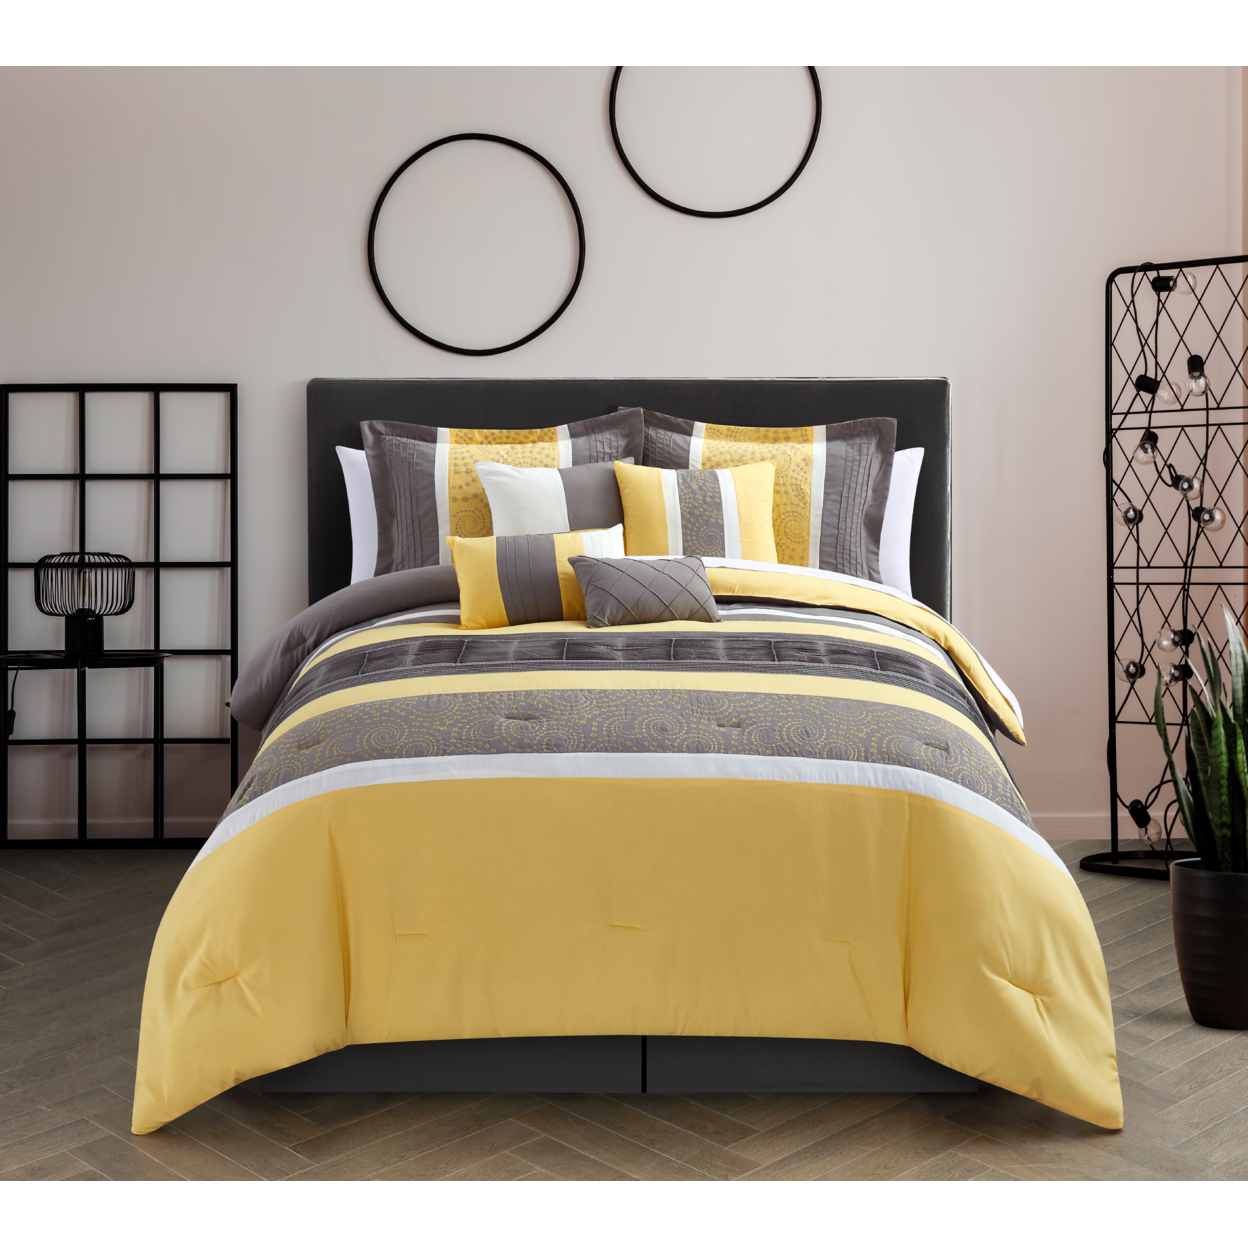 Livingston Oversized And Overfilled Comforter Set (8-Piece) - Yellow, Queen